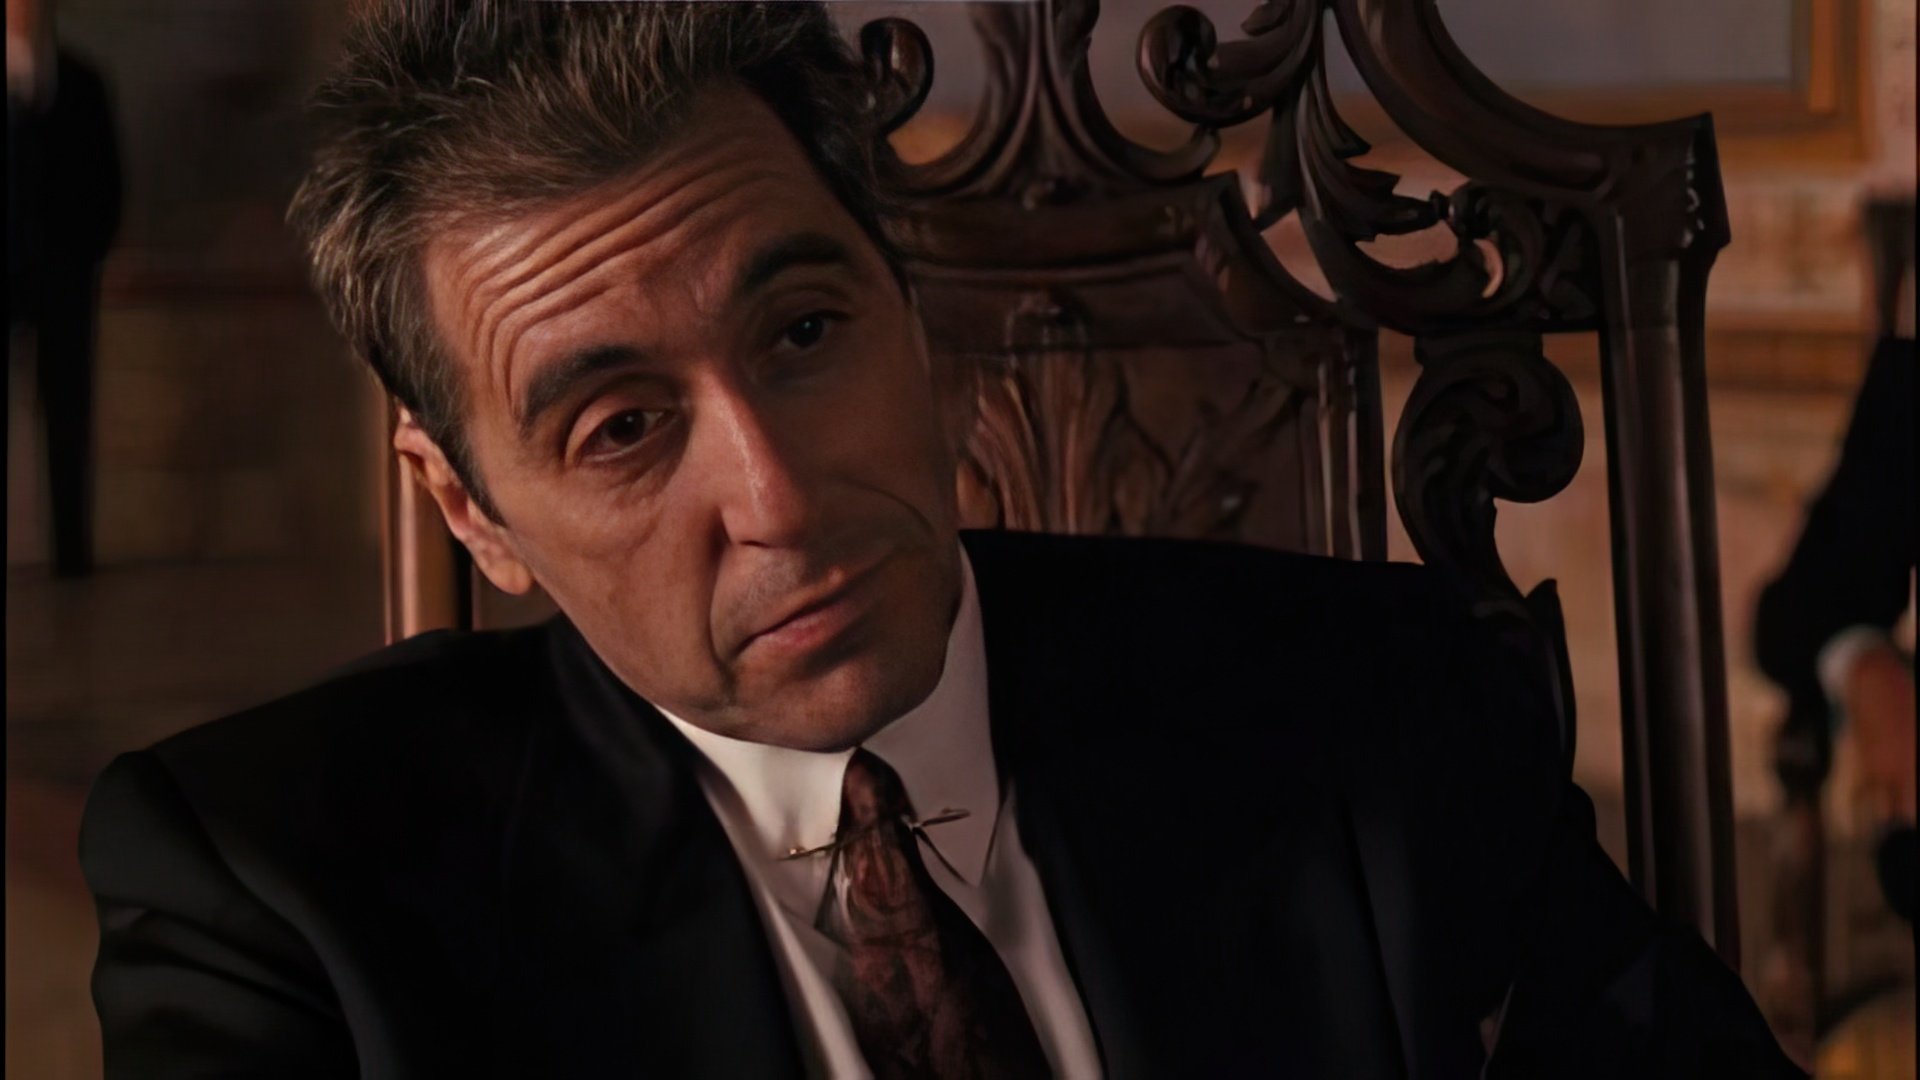 ”The Godfather part III”: Michael Corleone 20 years later